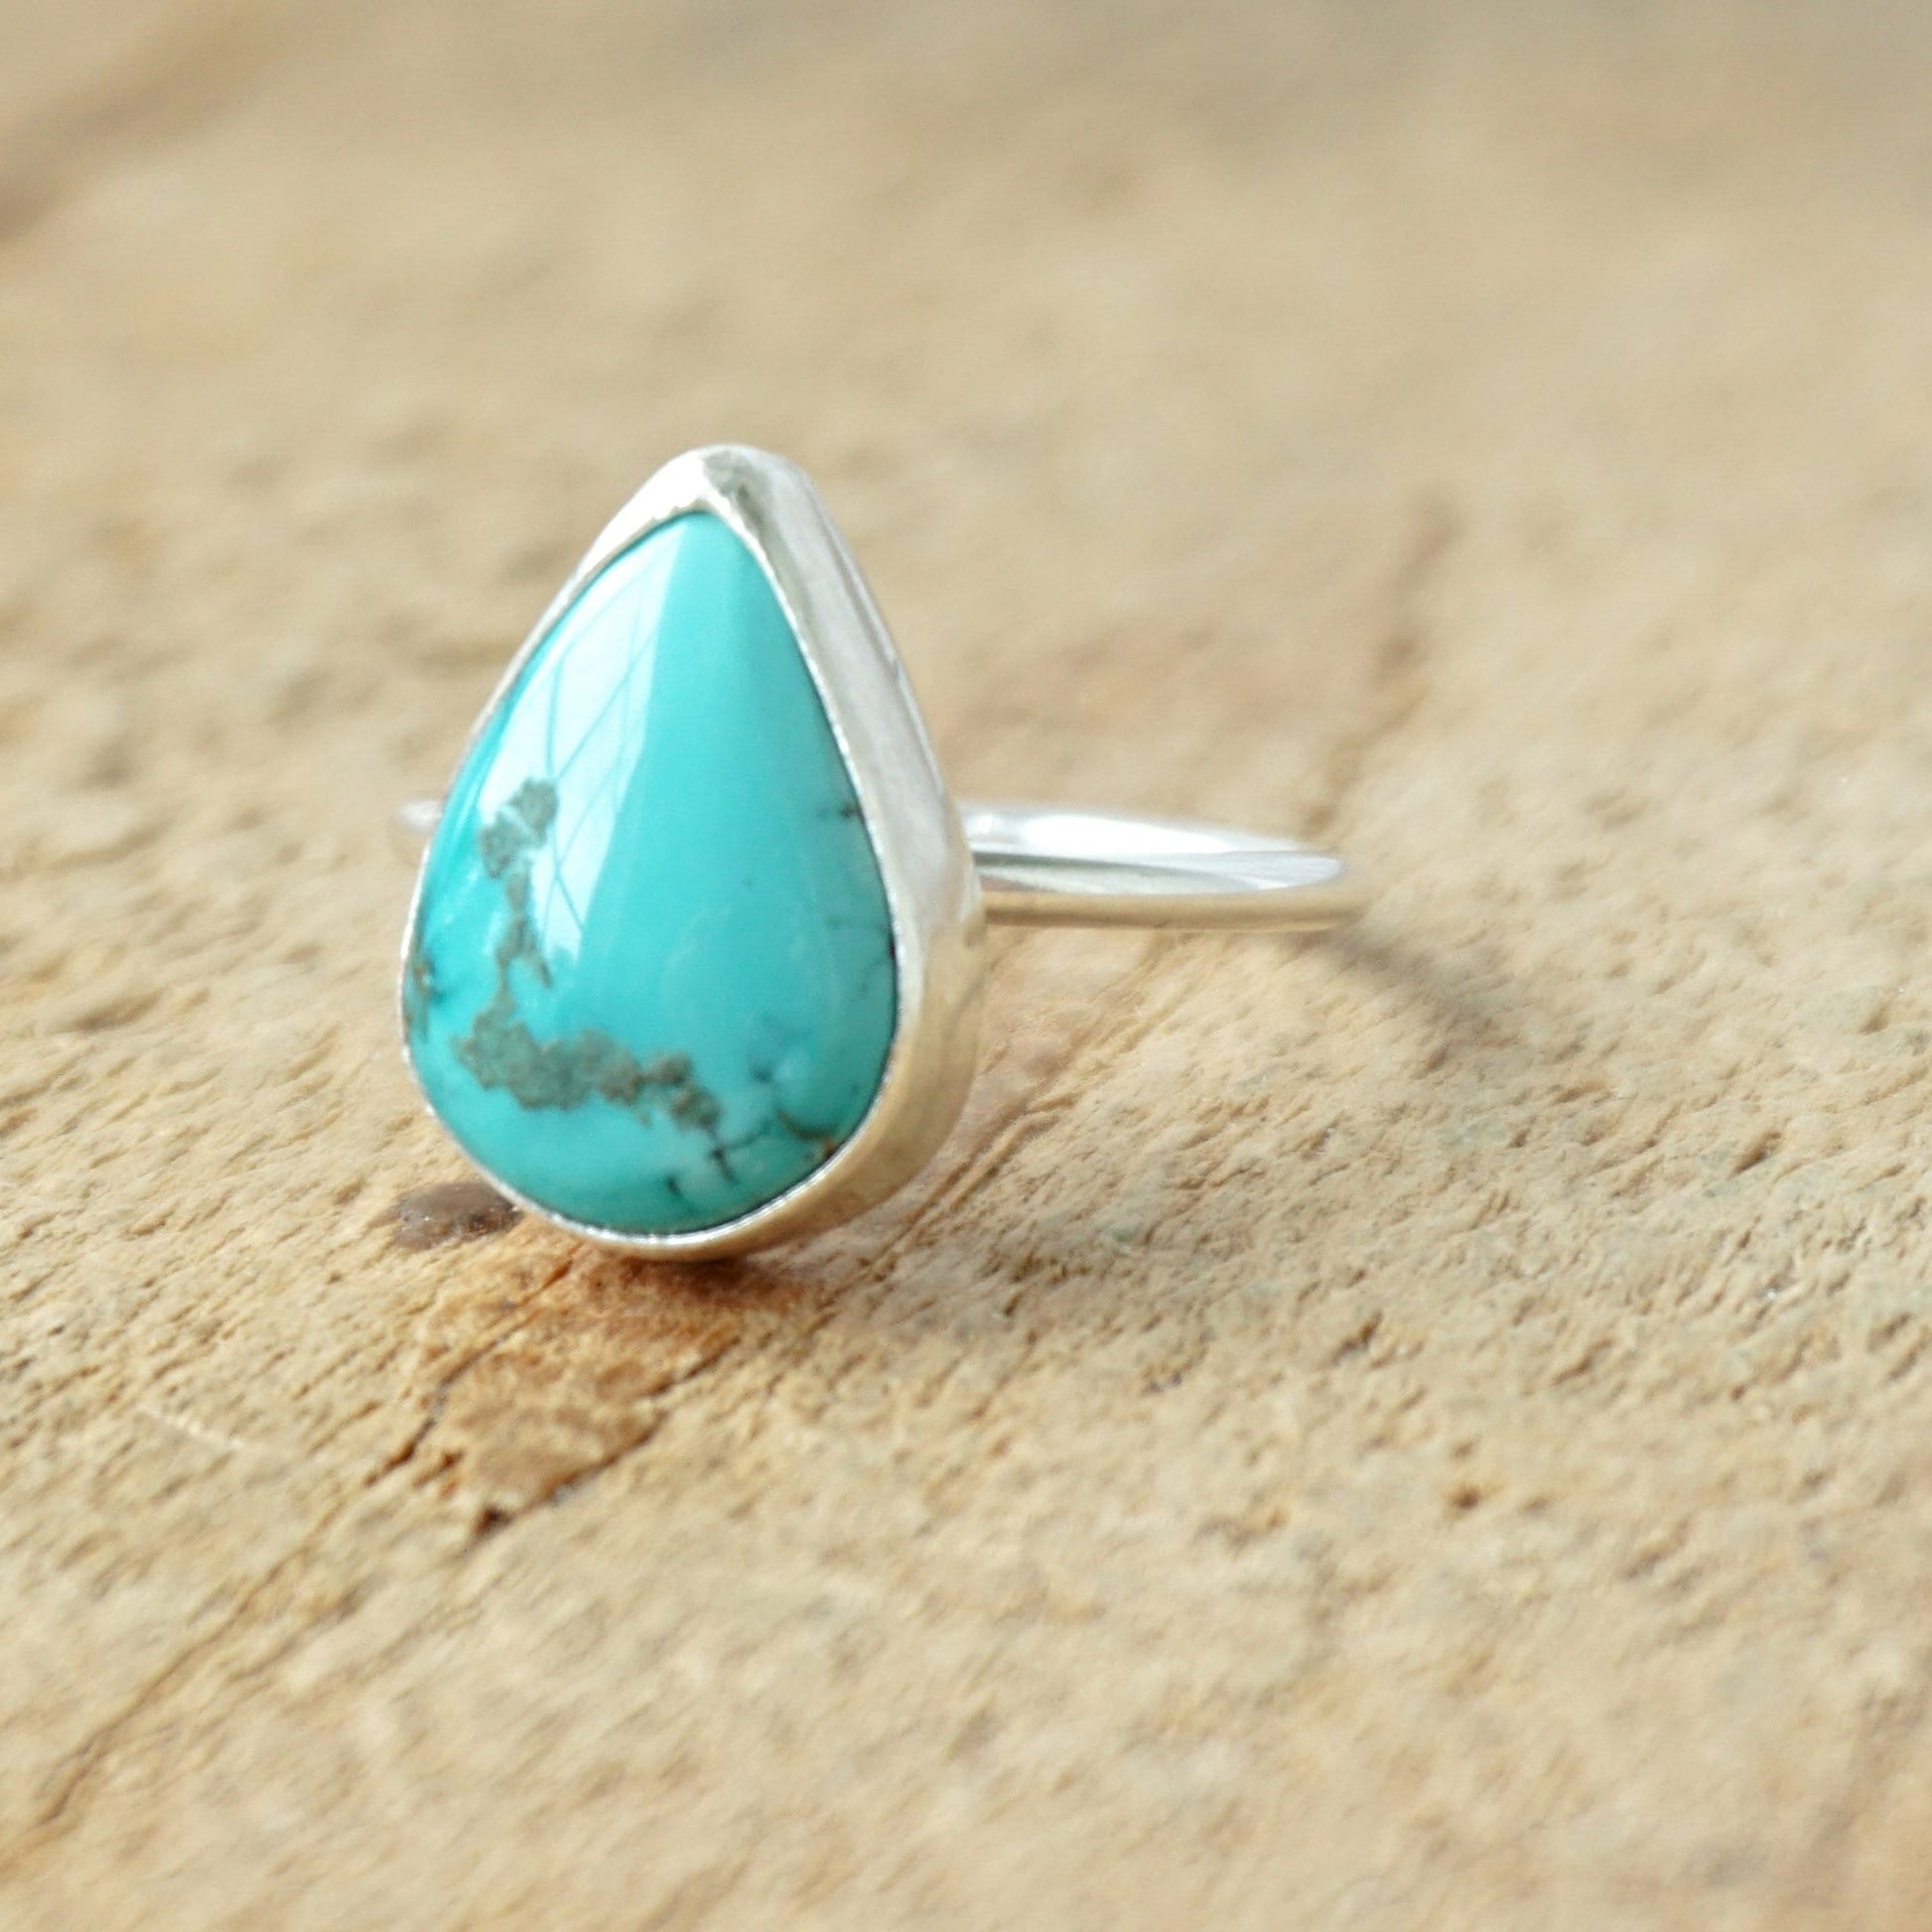 Size 7 Hubei Turquoise Stacking Ring - Turquoise Ring, Turquoise Jewelry, Stacking Jewelry, Stacker Ring, Sterling Silver Ring Jewelry